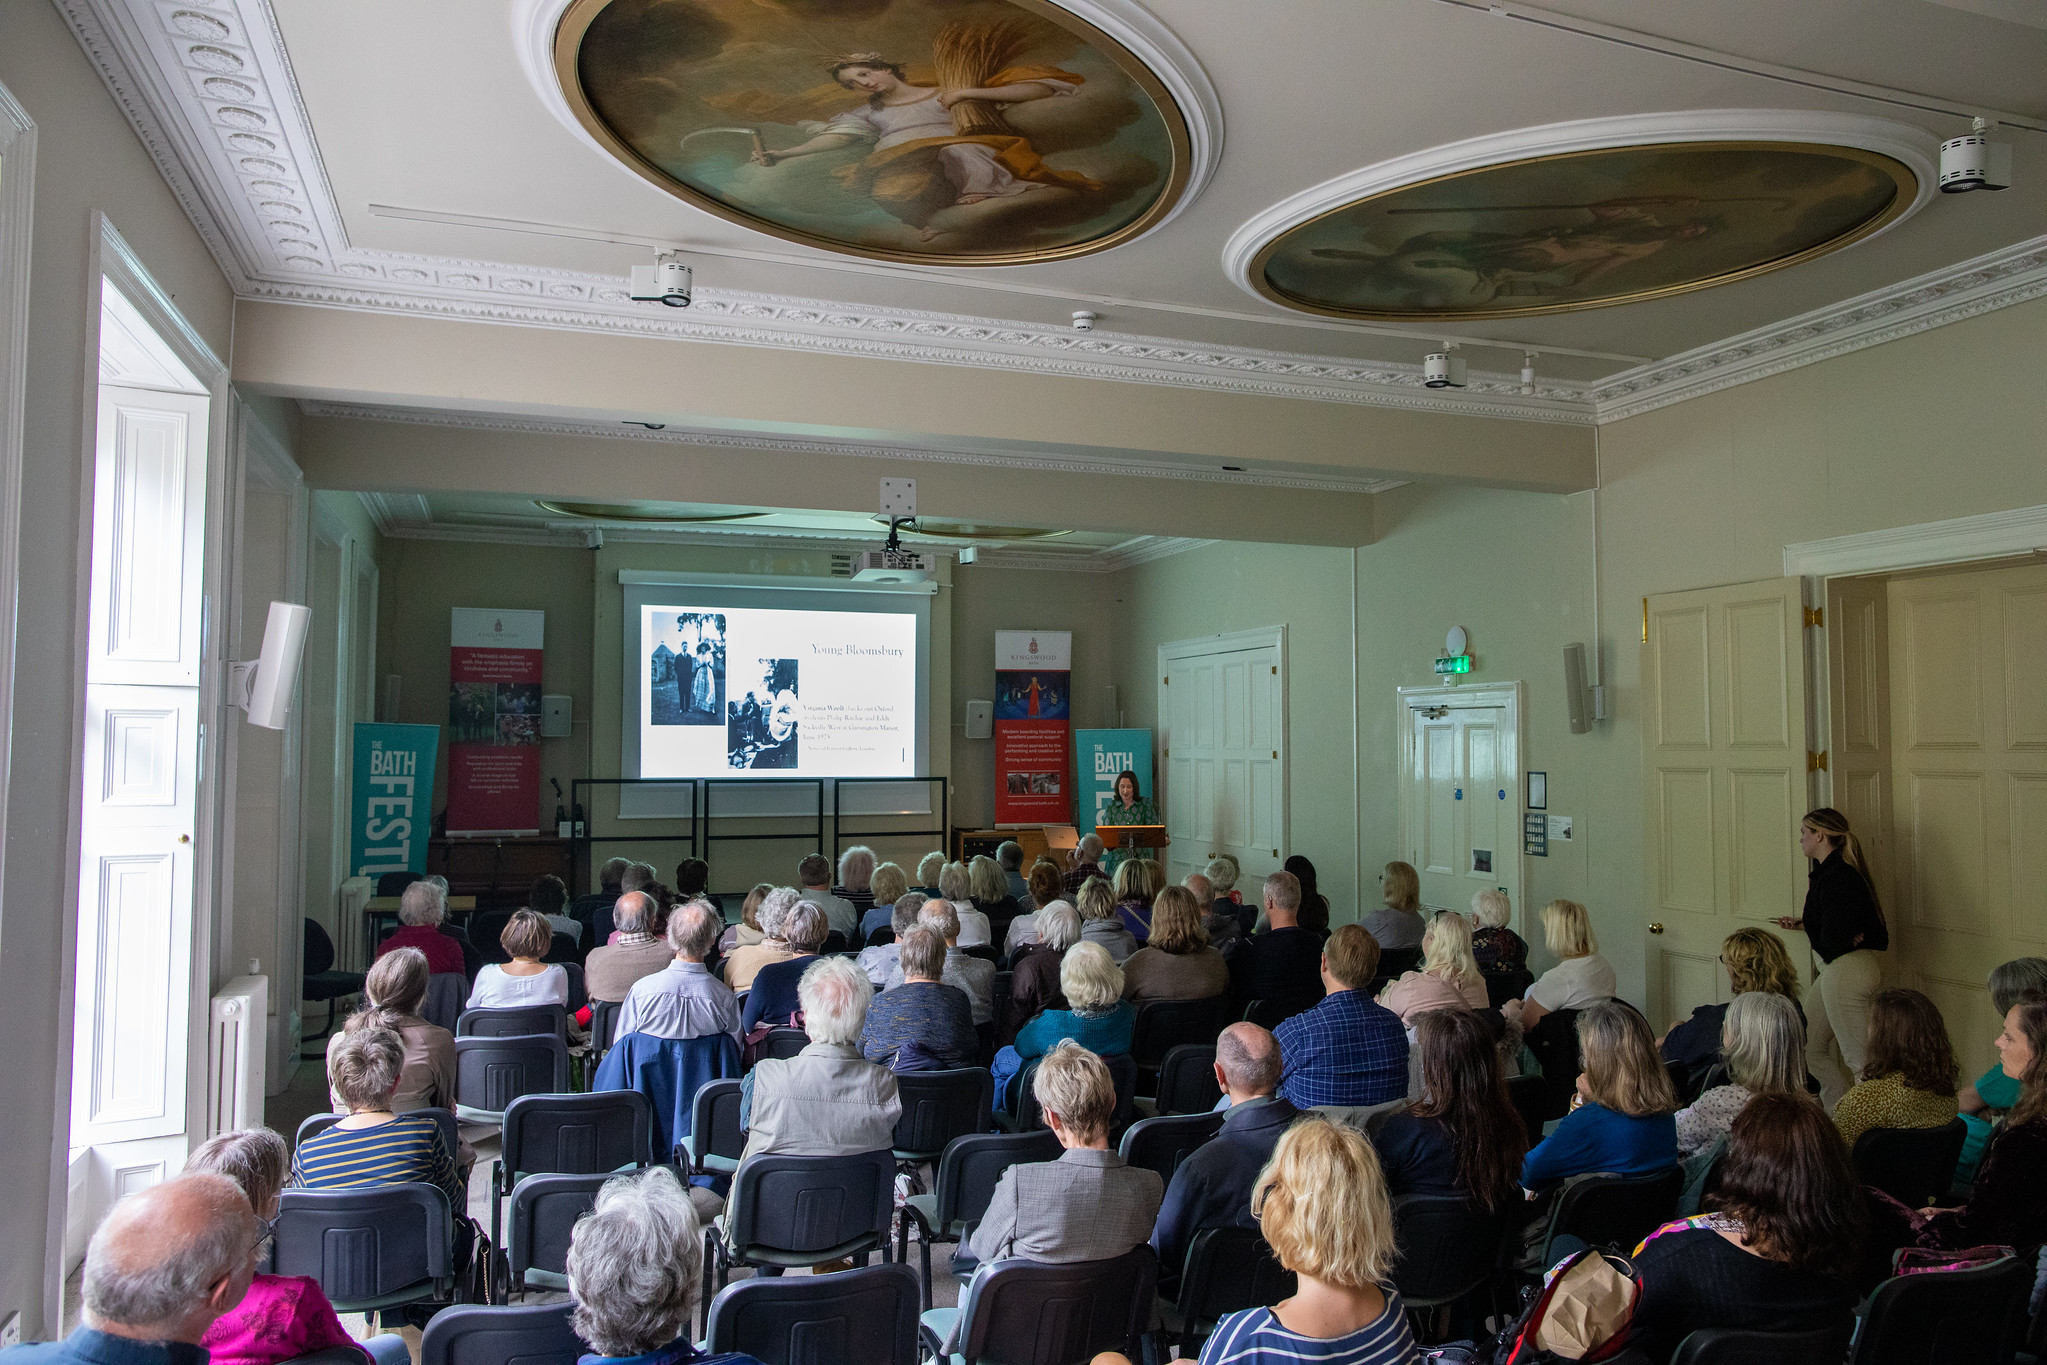 A full audience inside Bath Royal Literary and Scientific Institution